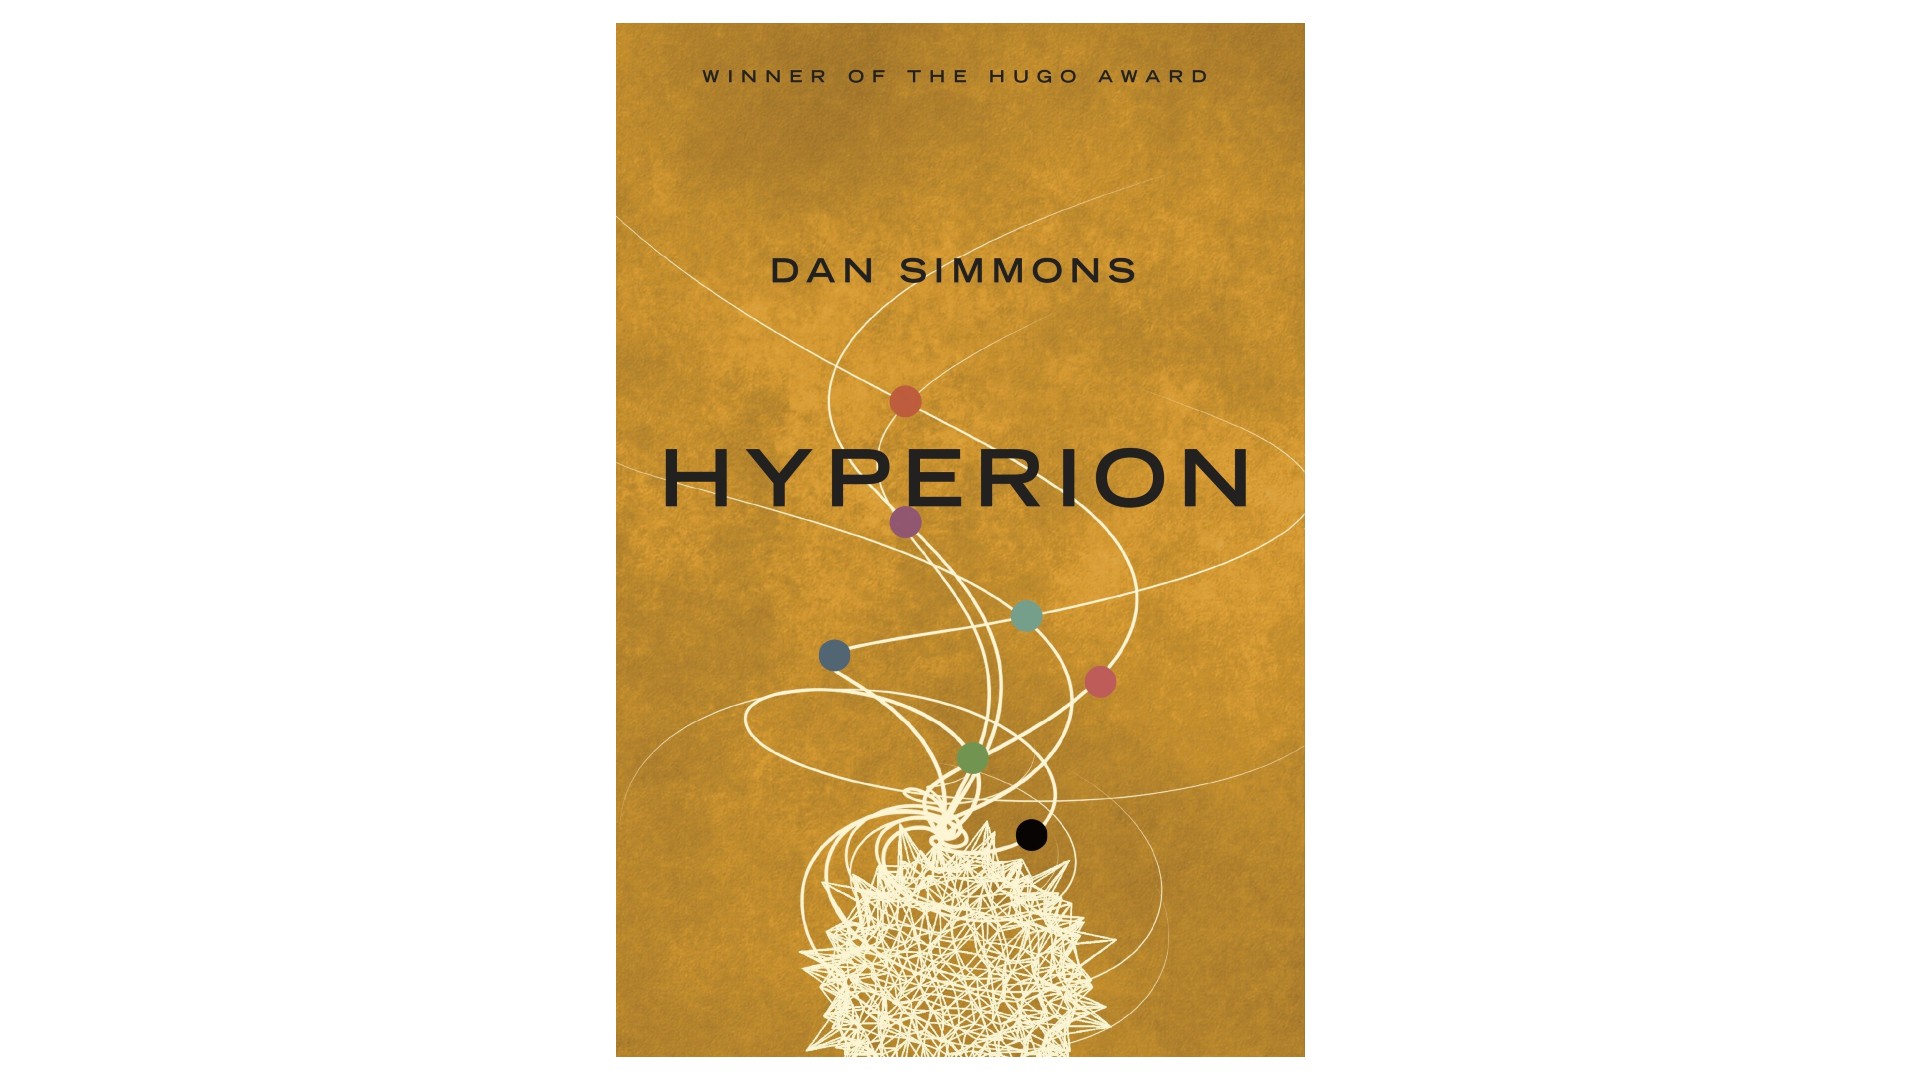 Hyperion by Dan Simmons_Doubleday (1989)